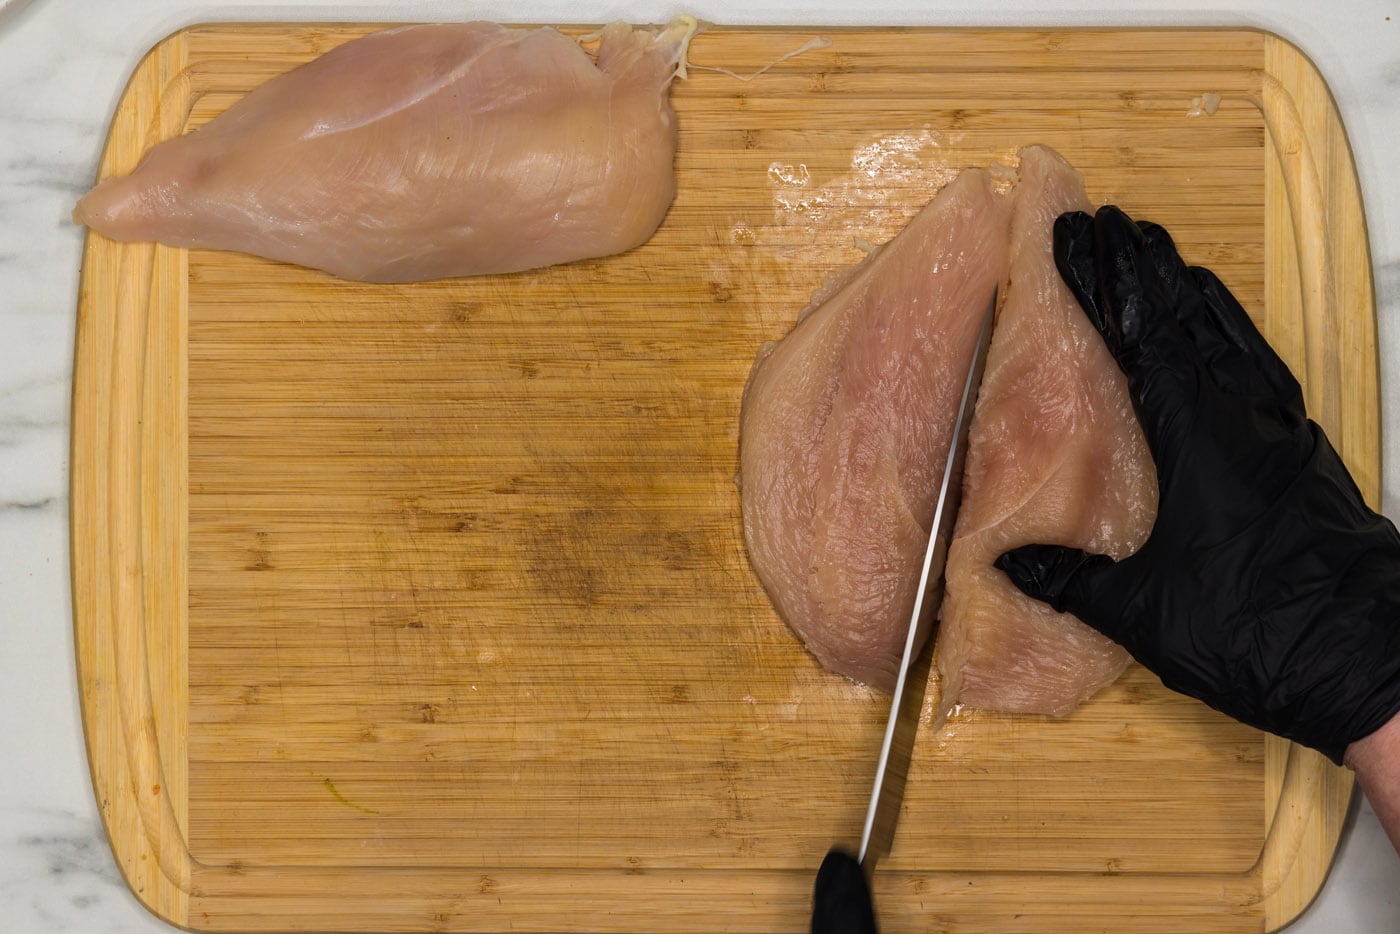 slicing chicken in half lengthwise with a knife